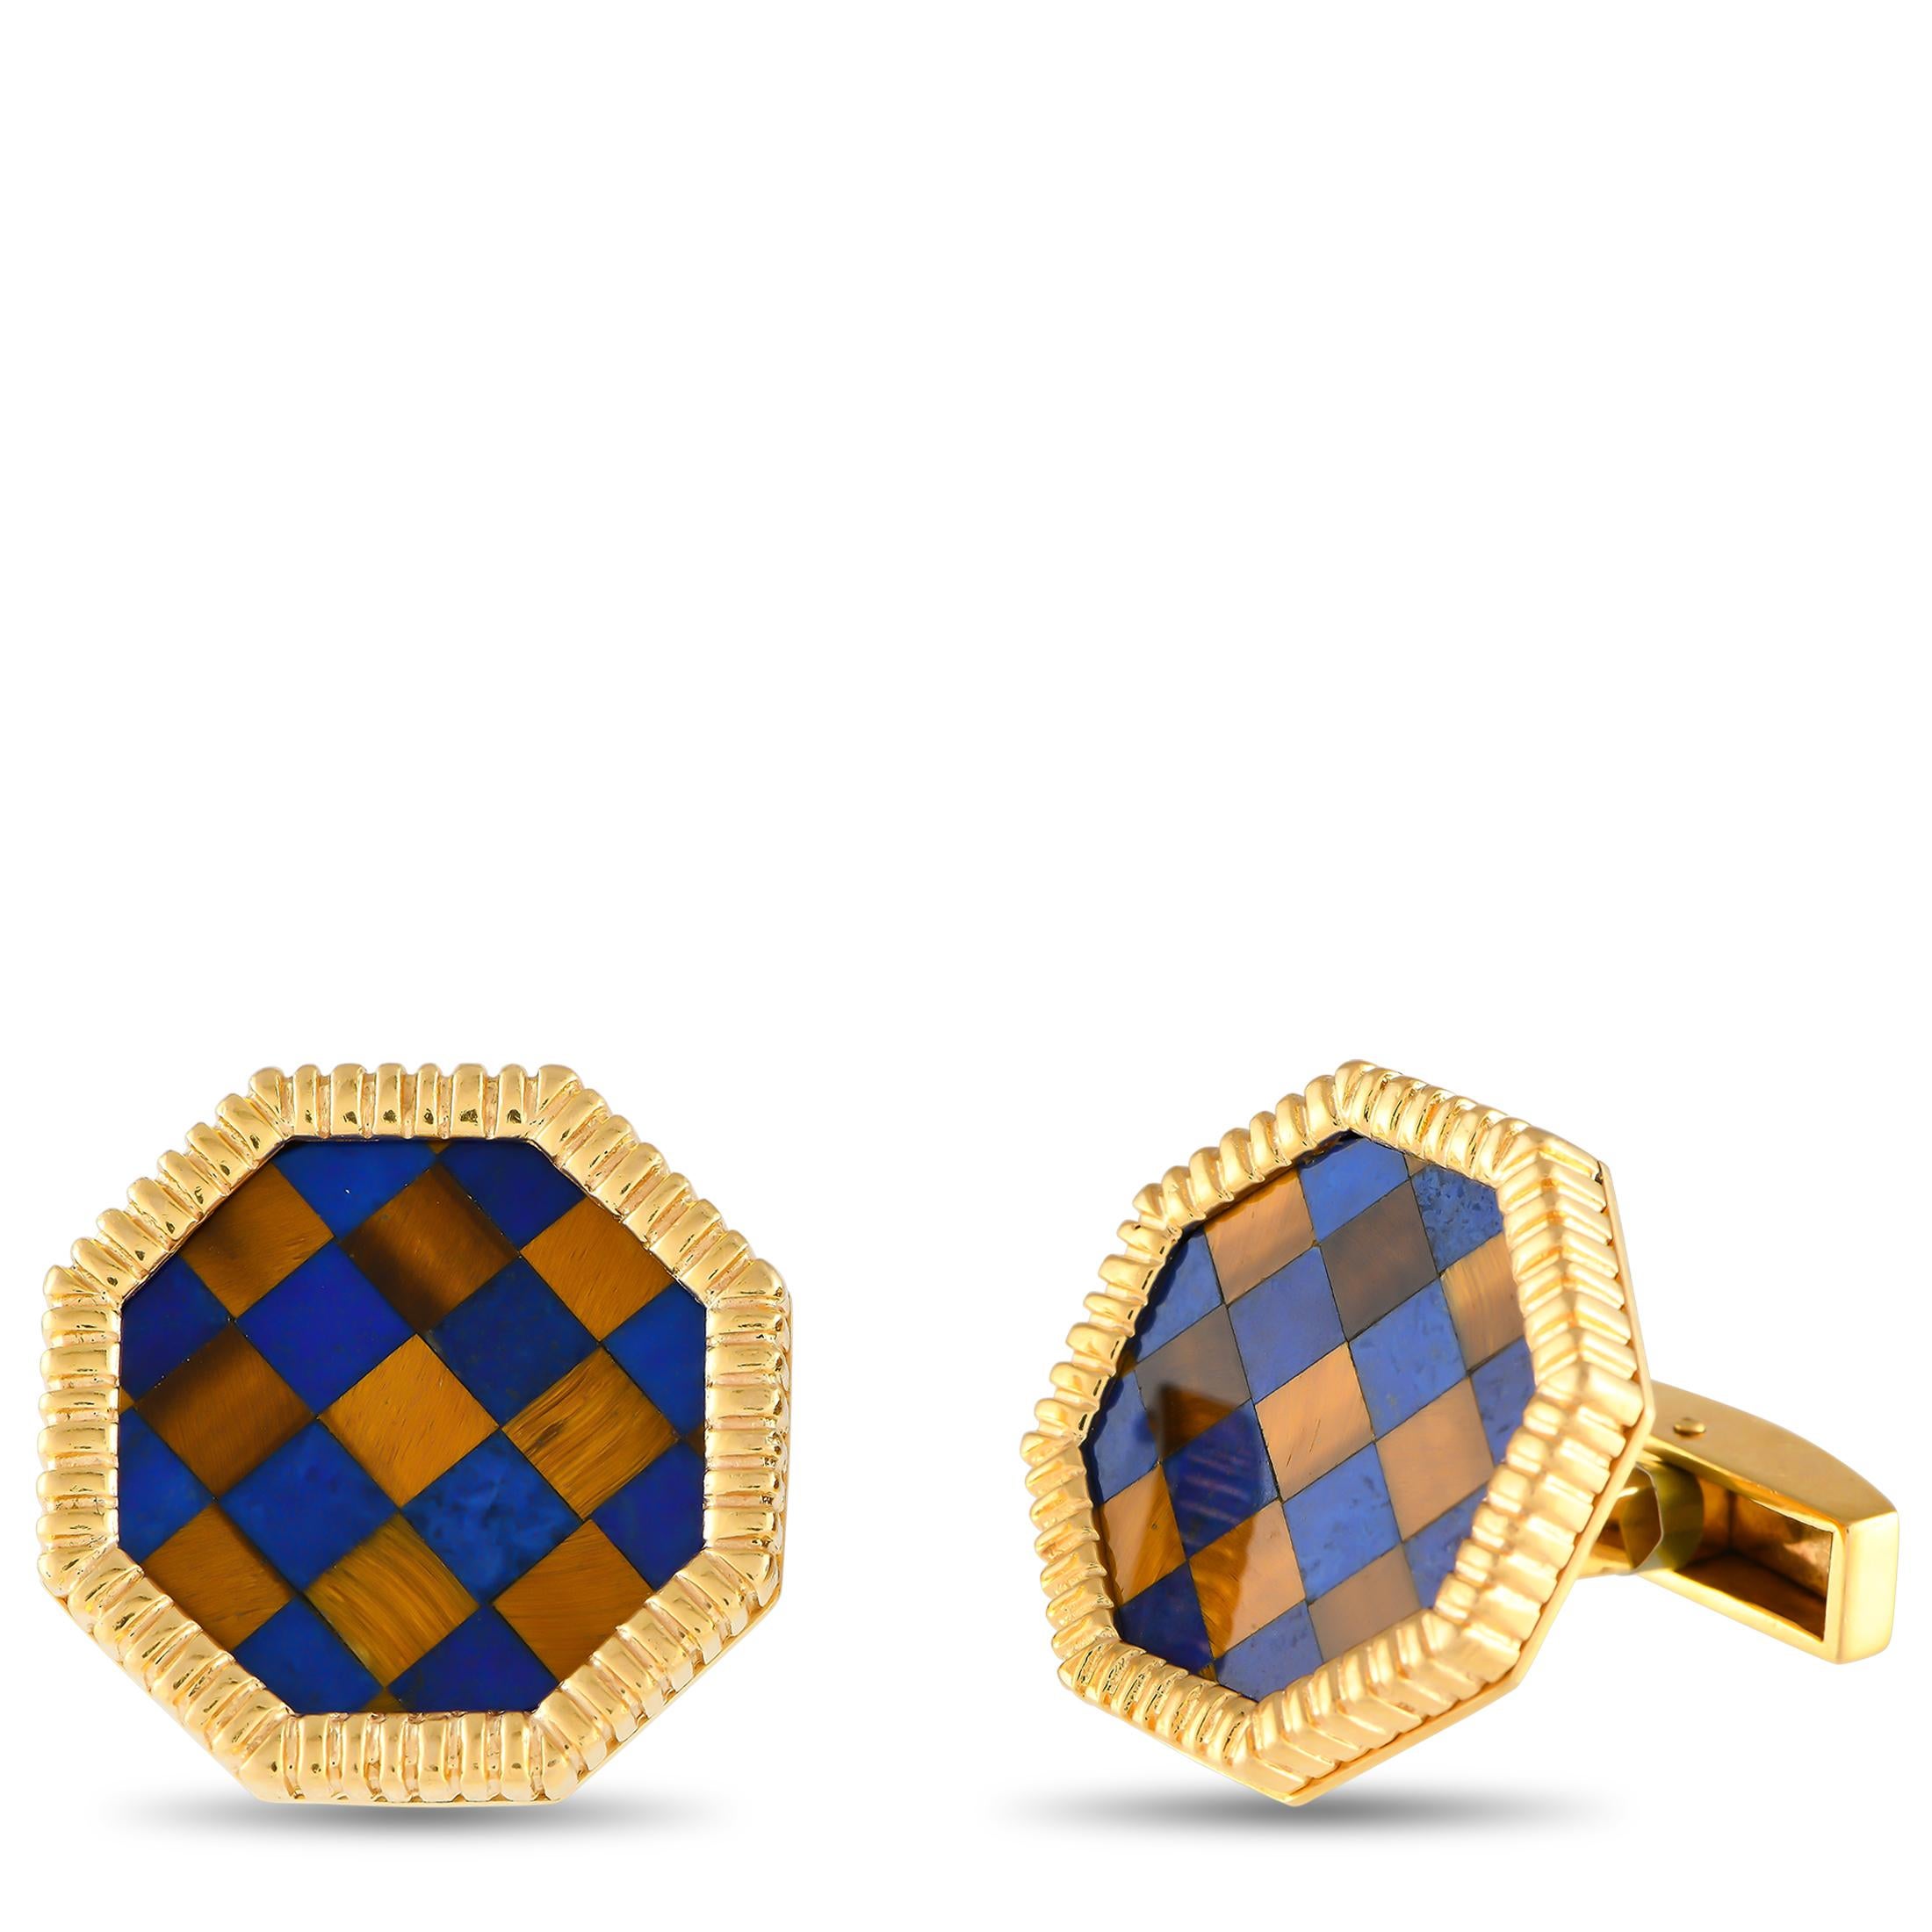 Blue Lapis and Tigers Eye gemstones come together in a charming checkerboard pattern on these upscale cufflinks. Crafted from 14K Yellow Gold, each one measures 0.85 round.This jewelry piece is offered in estate condition and includes a gift box.